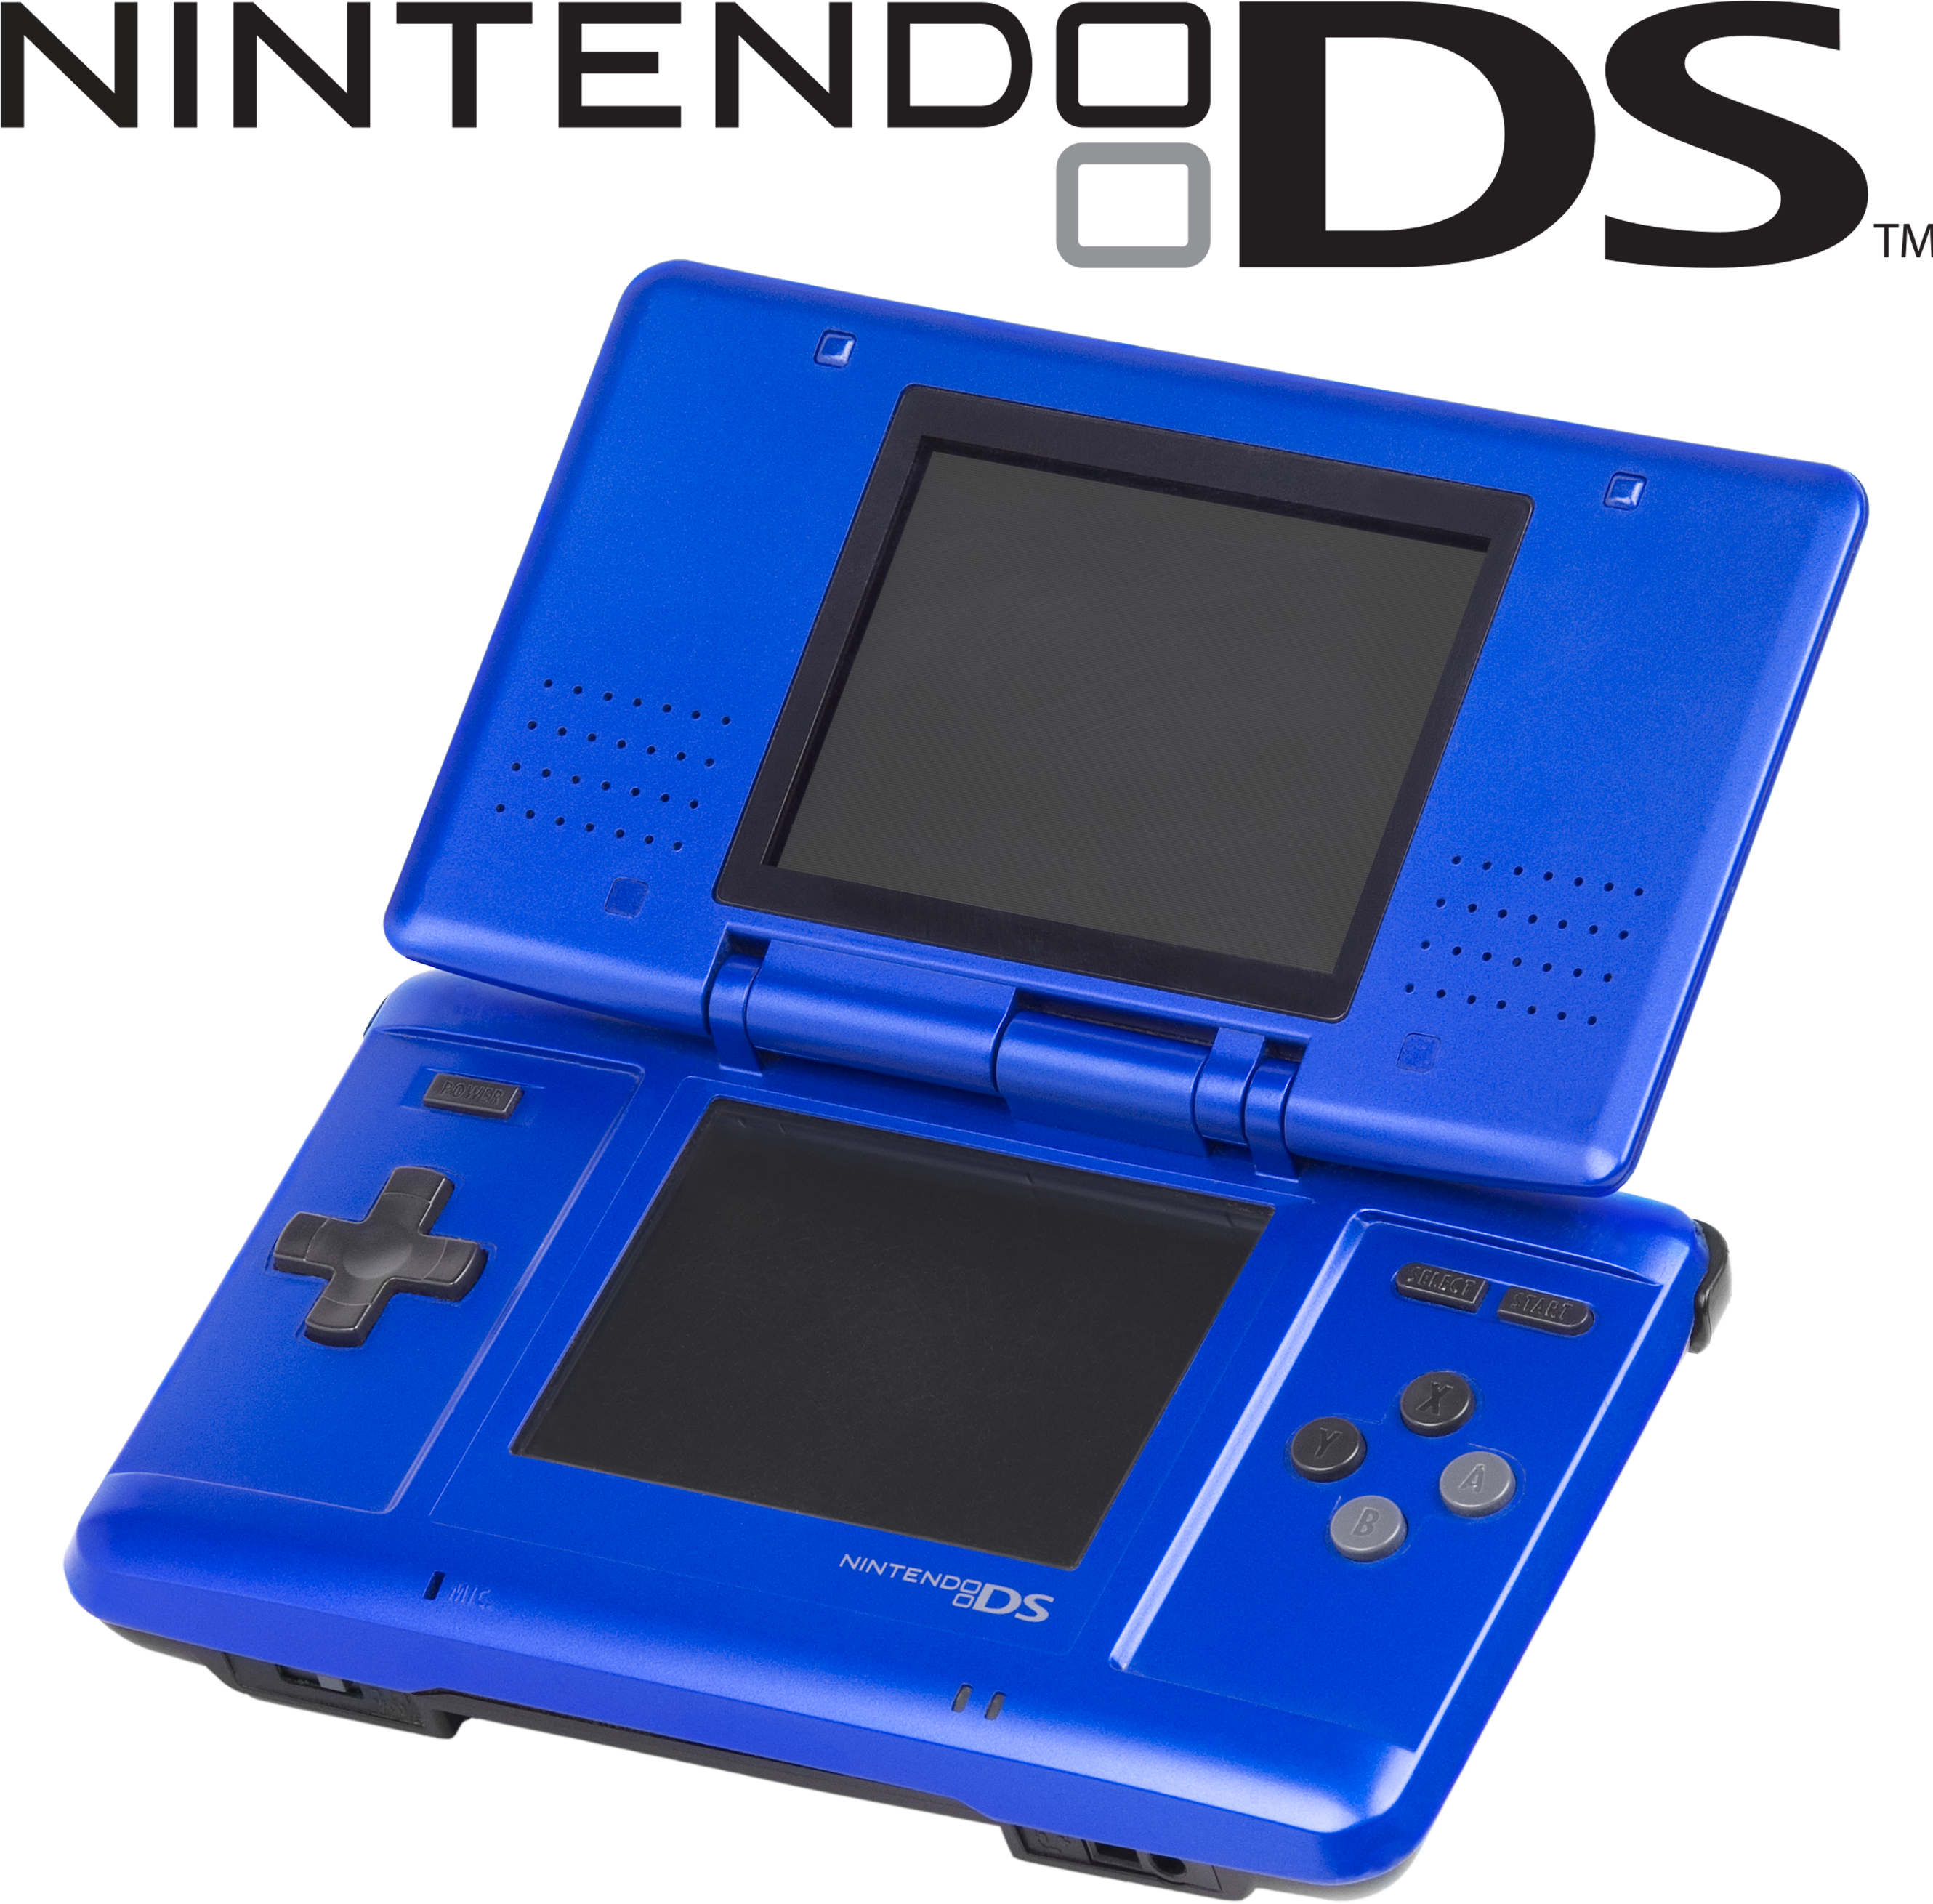 sonic the hedgehog nds